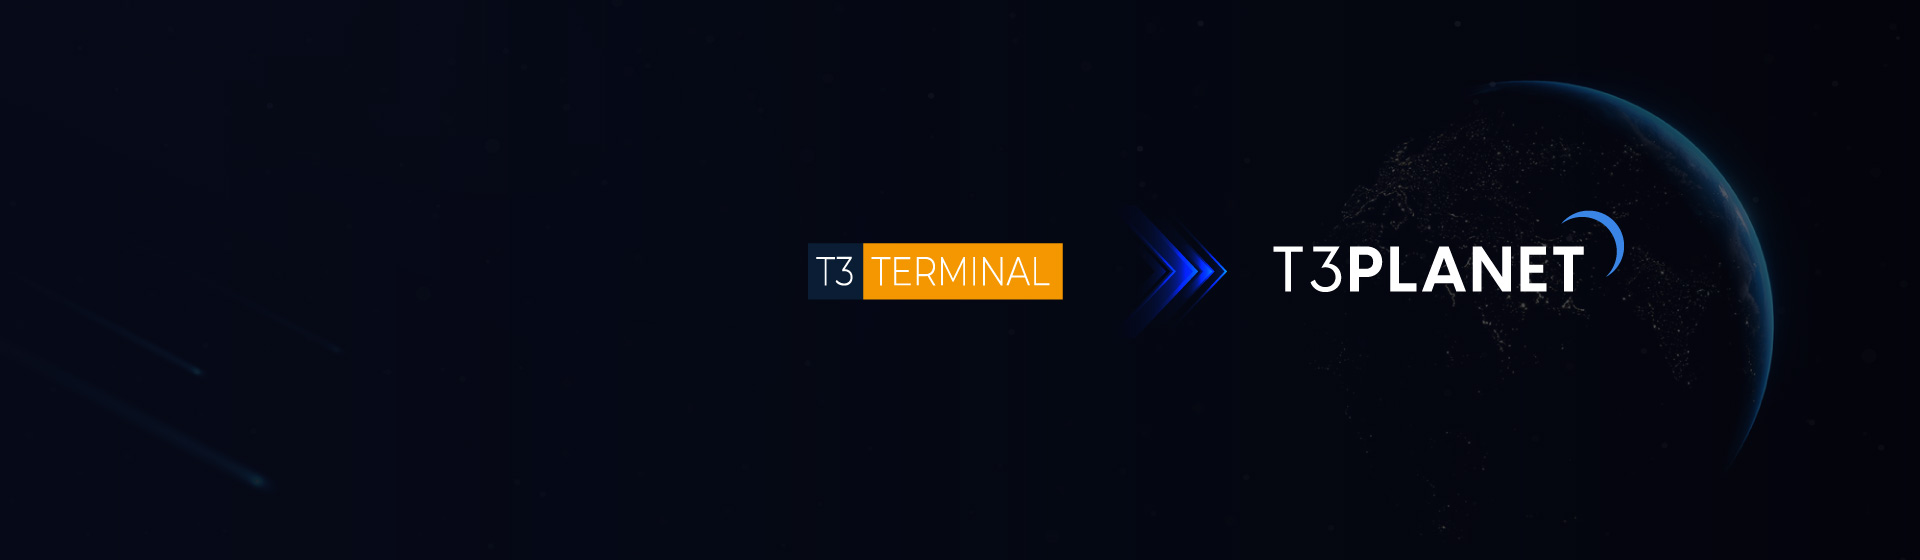 Your Trusted T3Terminal Is Now T3Planet!